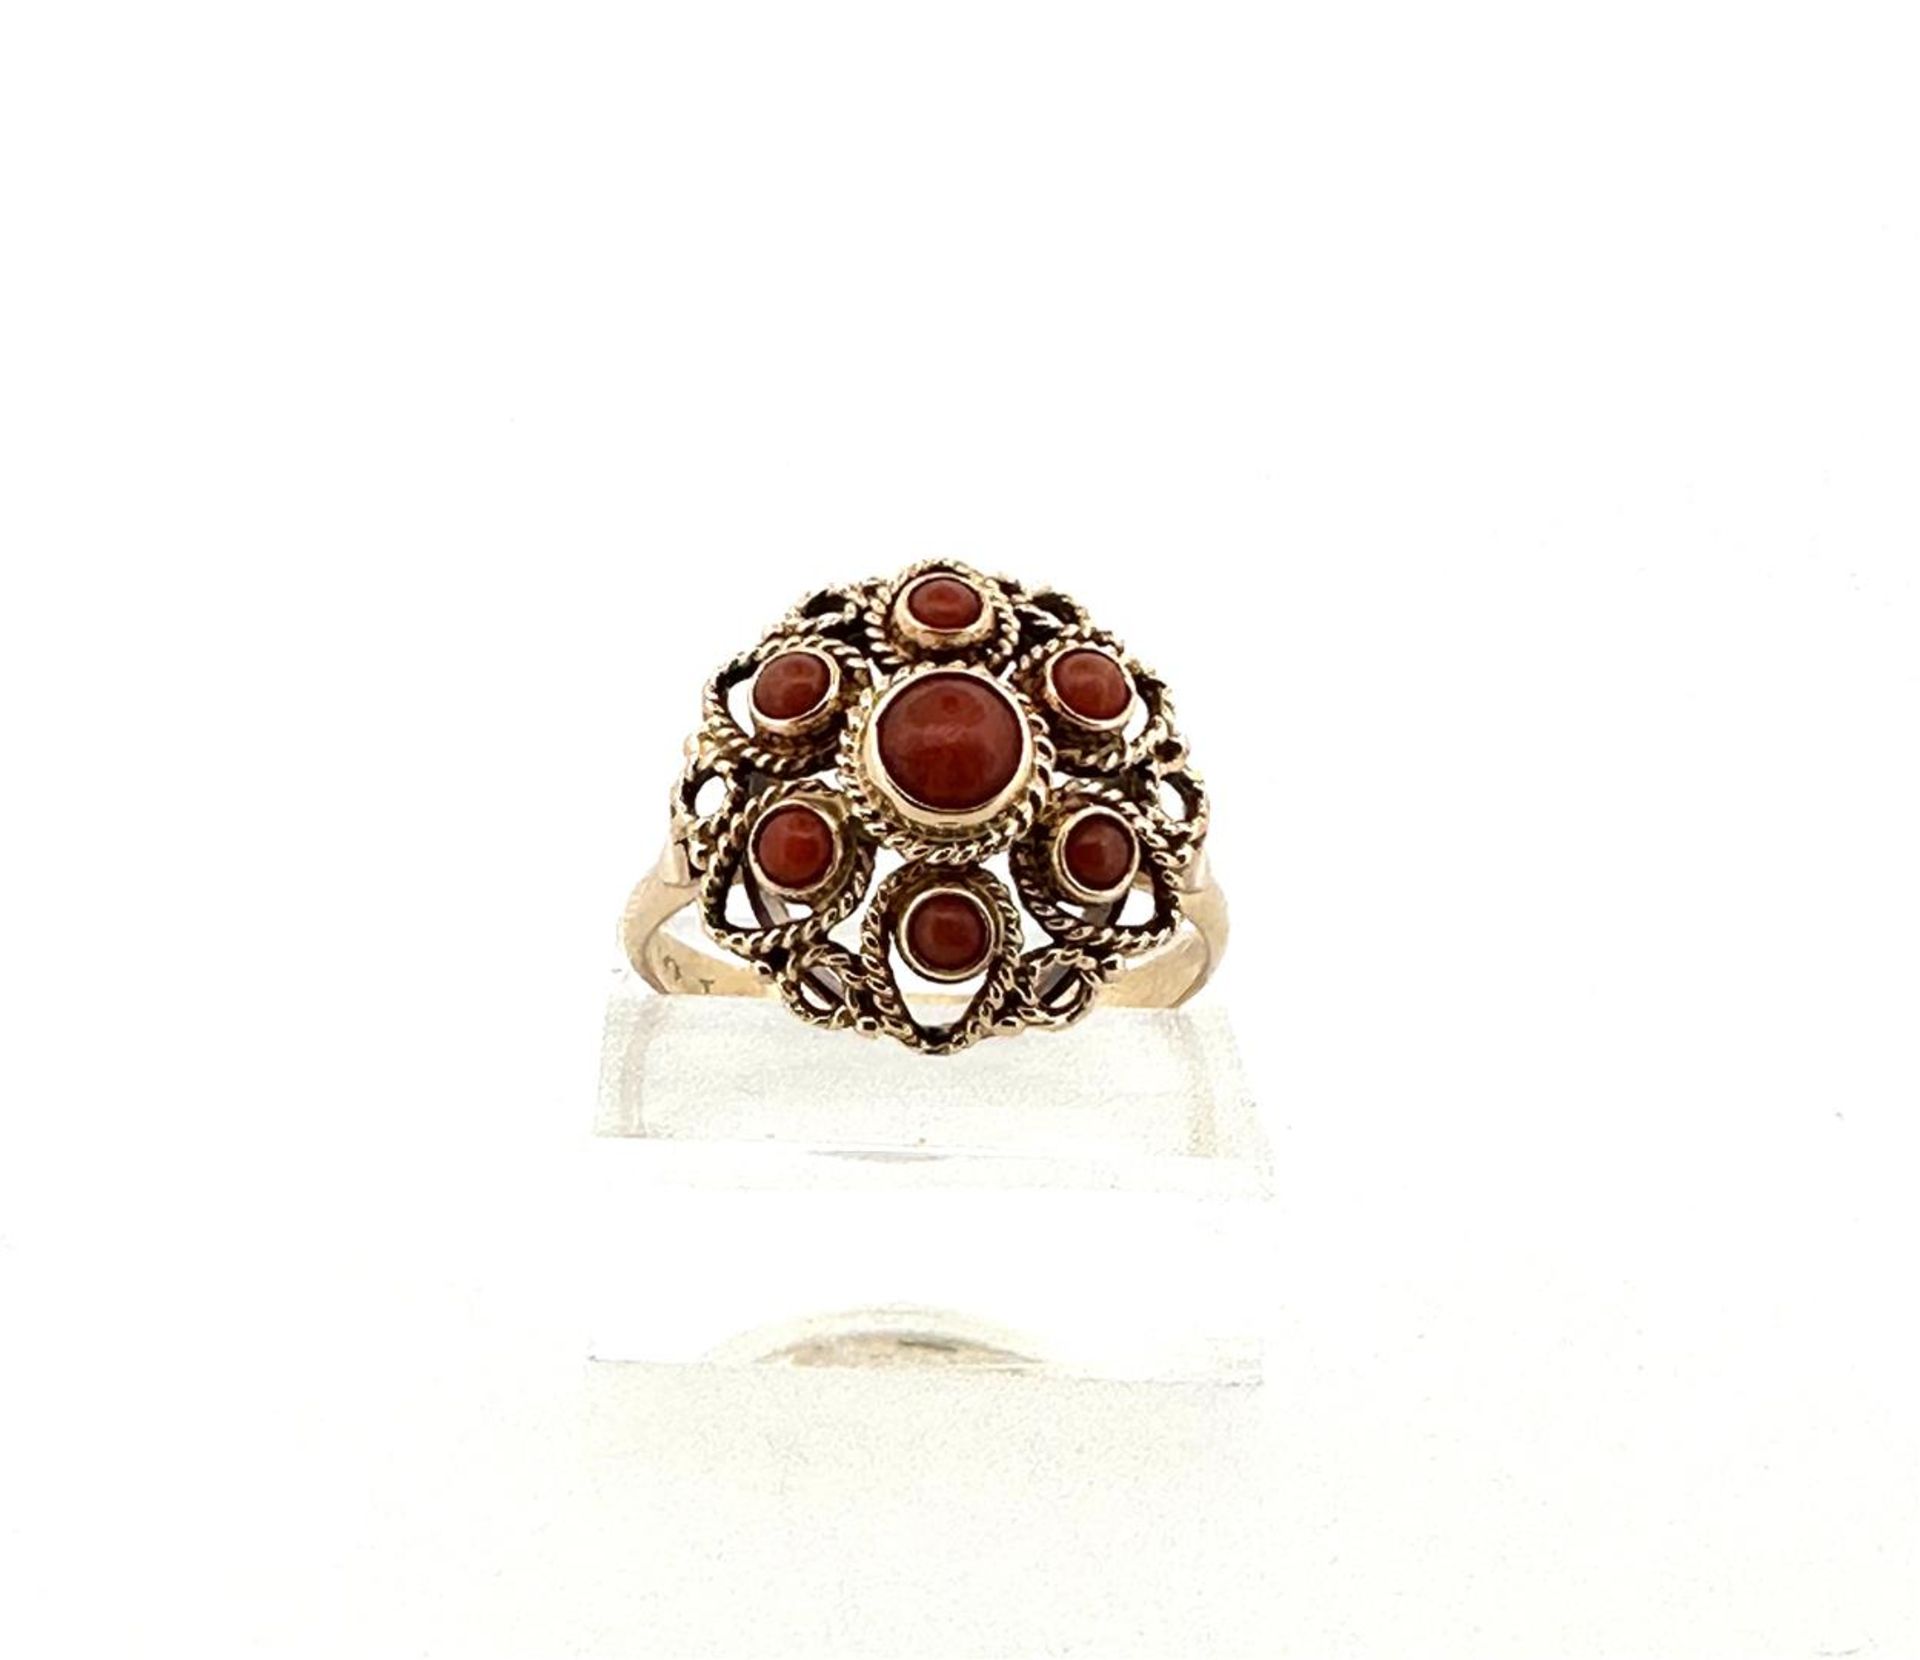 14kt rose gold rosette ring set with red coral.
The ring is gracefully finished with twisted wire an